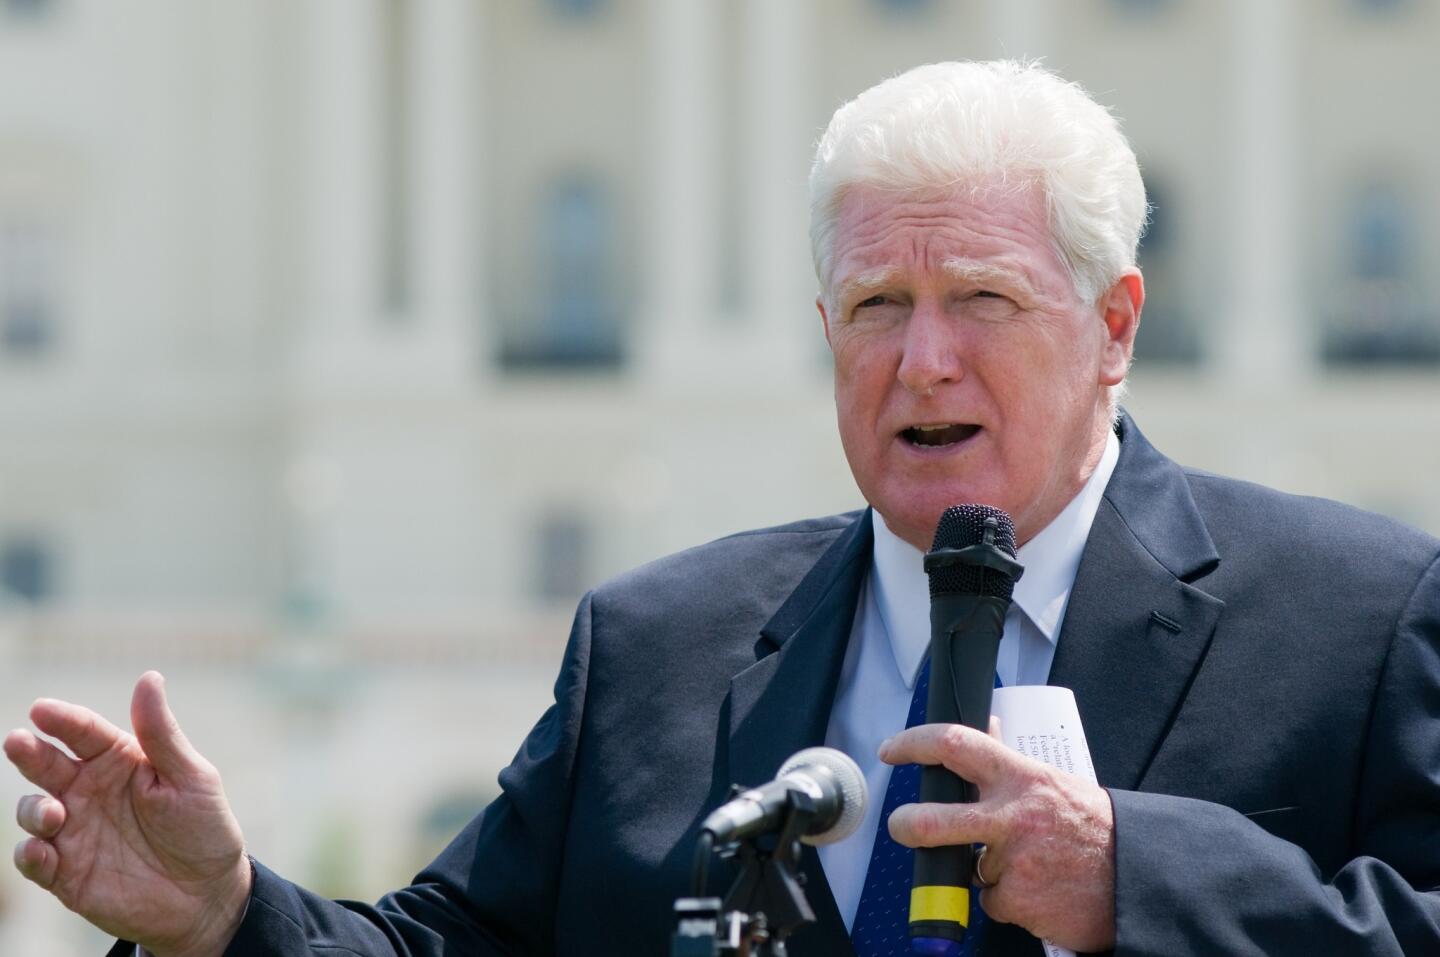 Rep. James Moran (D-Va.) announced Jan. 15 that he would step down from the seat he's occupied for two decades. The ranking Democrat on the House Appropriations Interior subcommittee, Moran said in a news release that his retirement marked the right time to "move on to the next challenge."